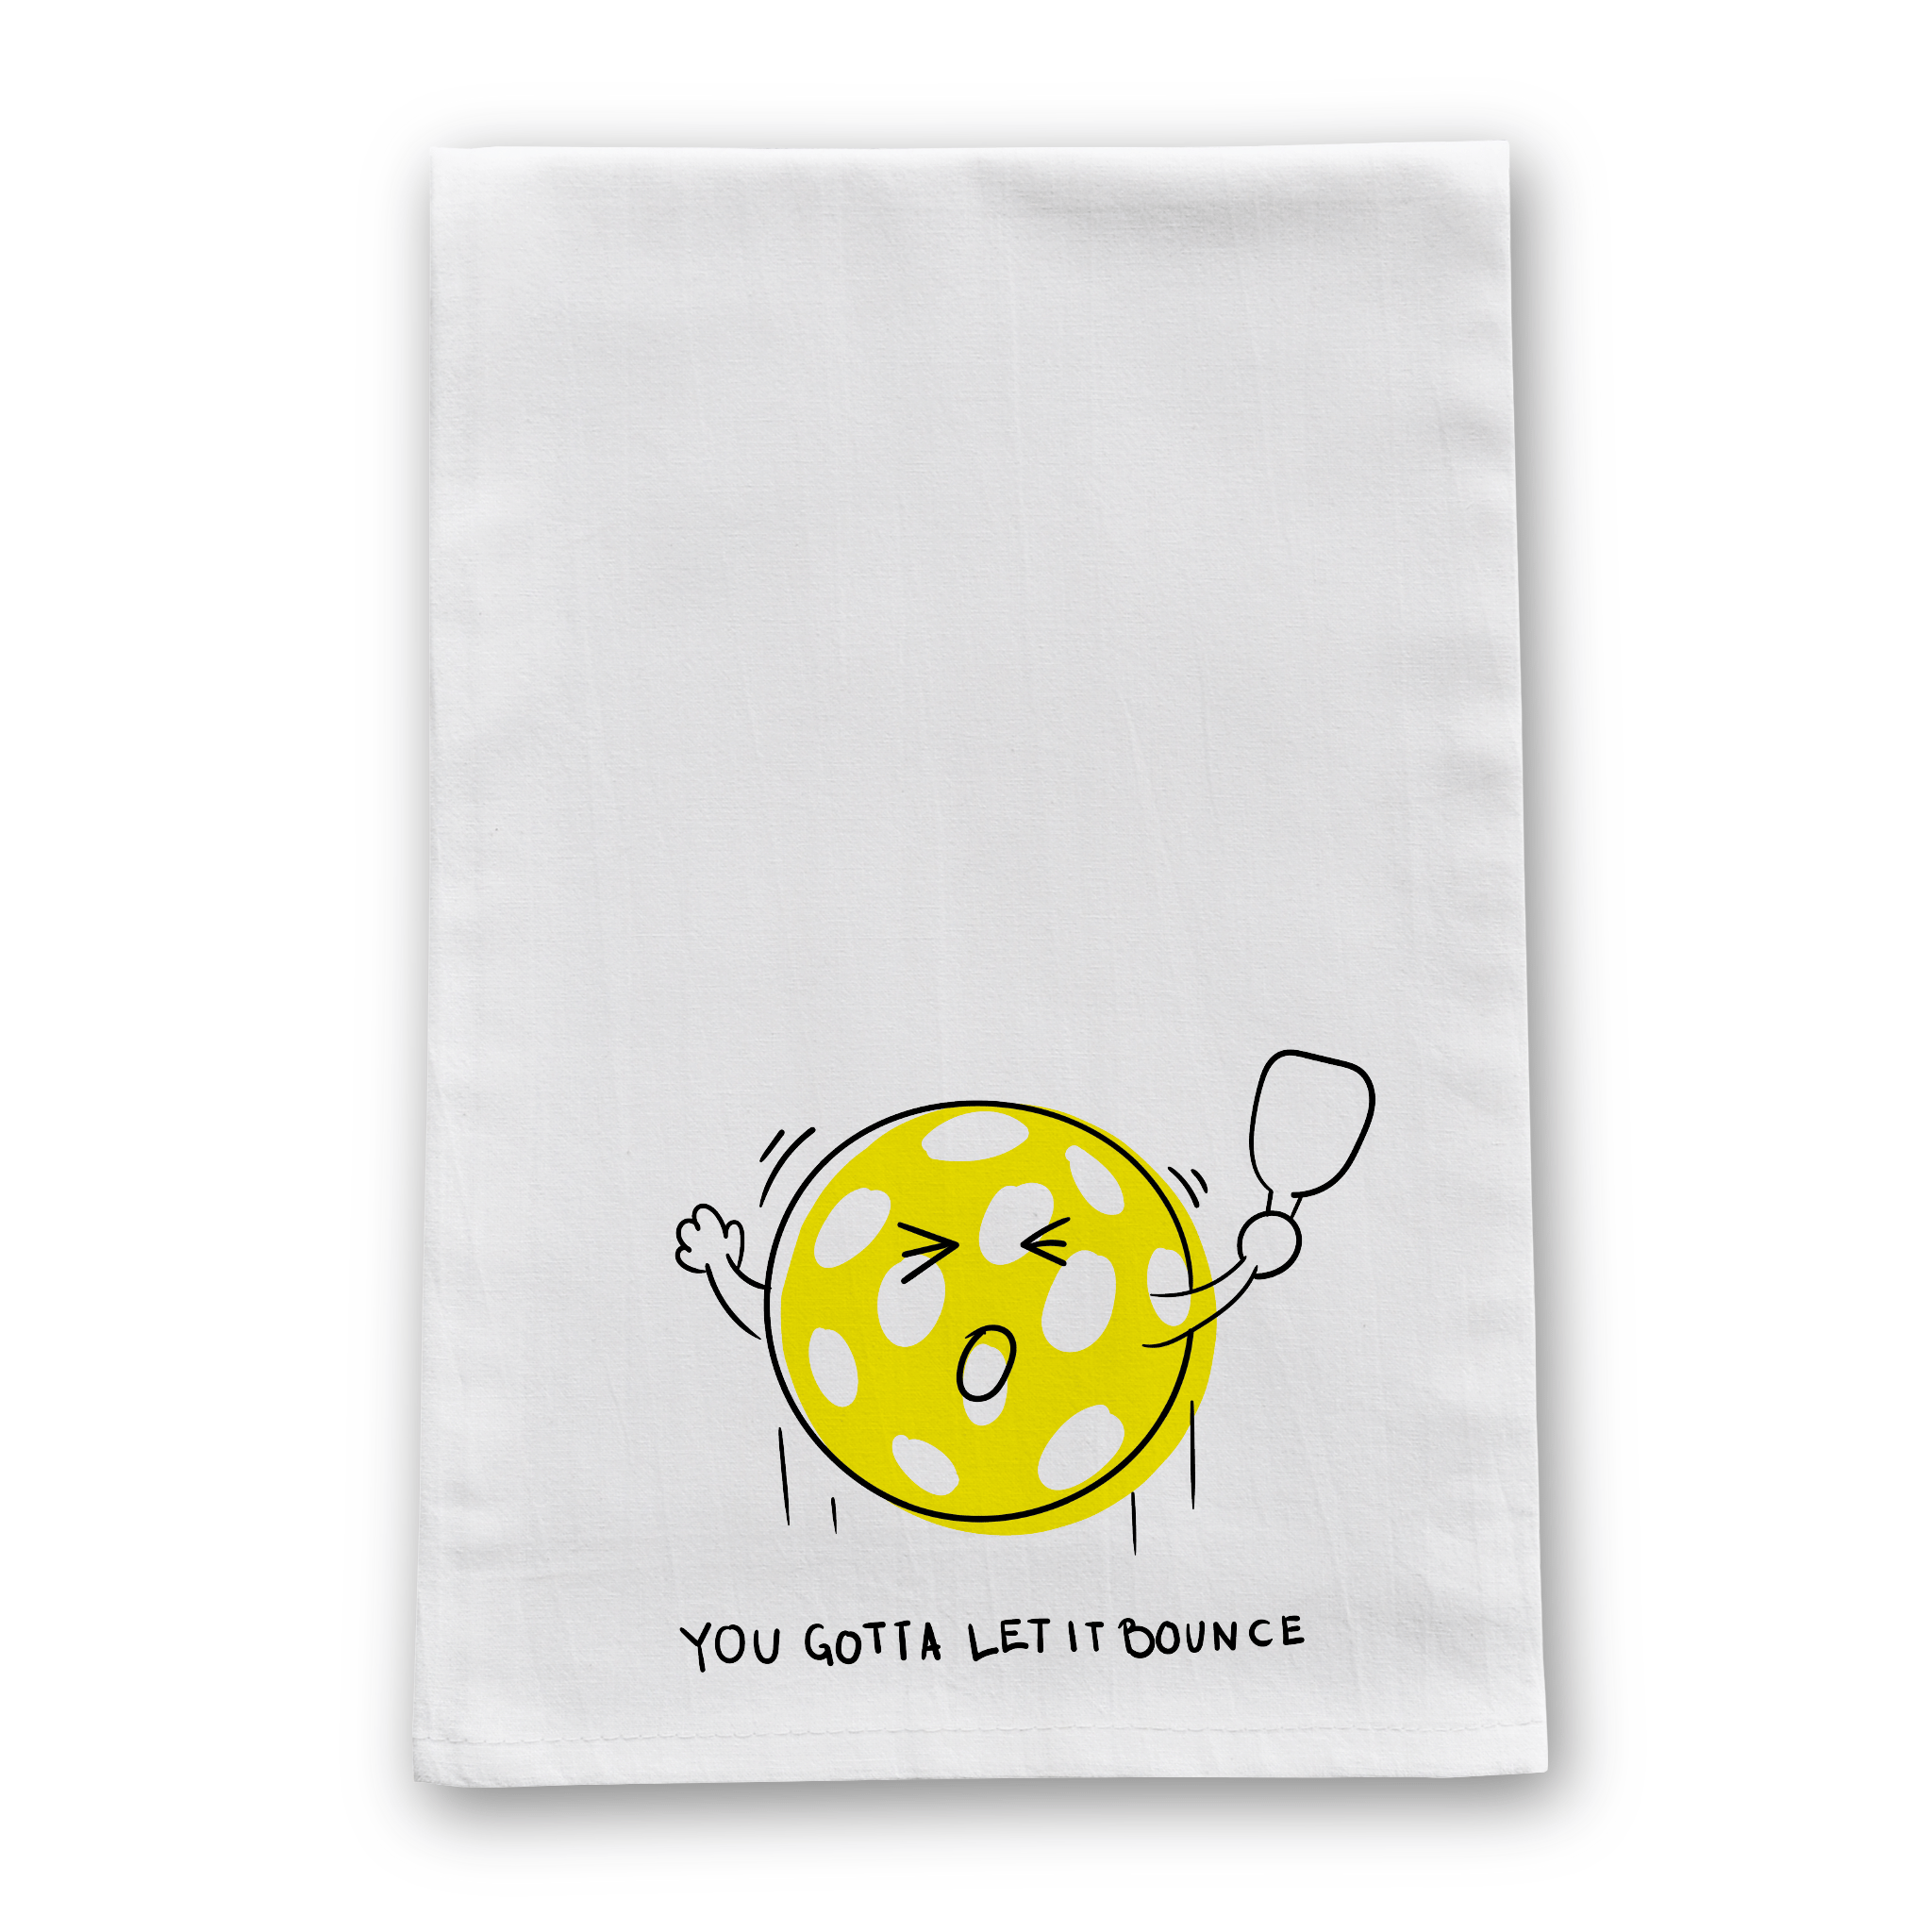 Tea towel printed with You Gotta Let it Bounce